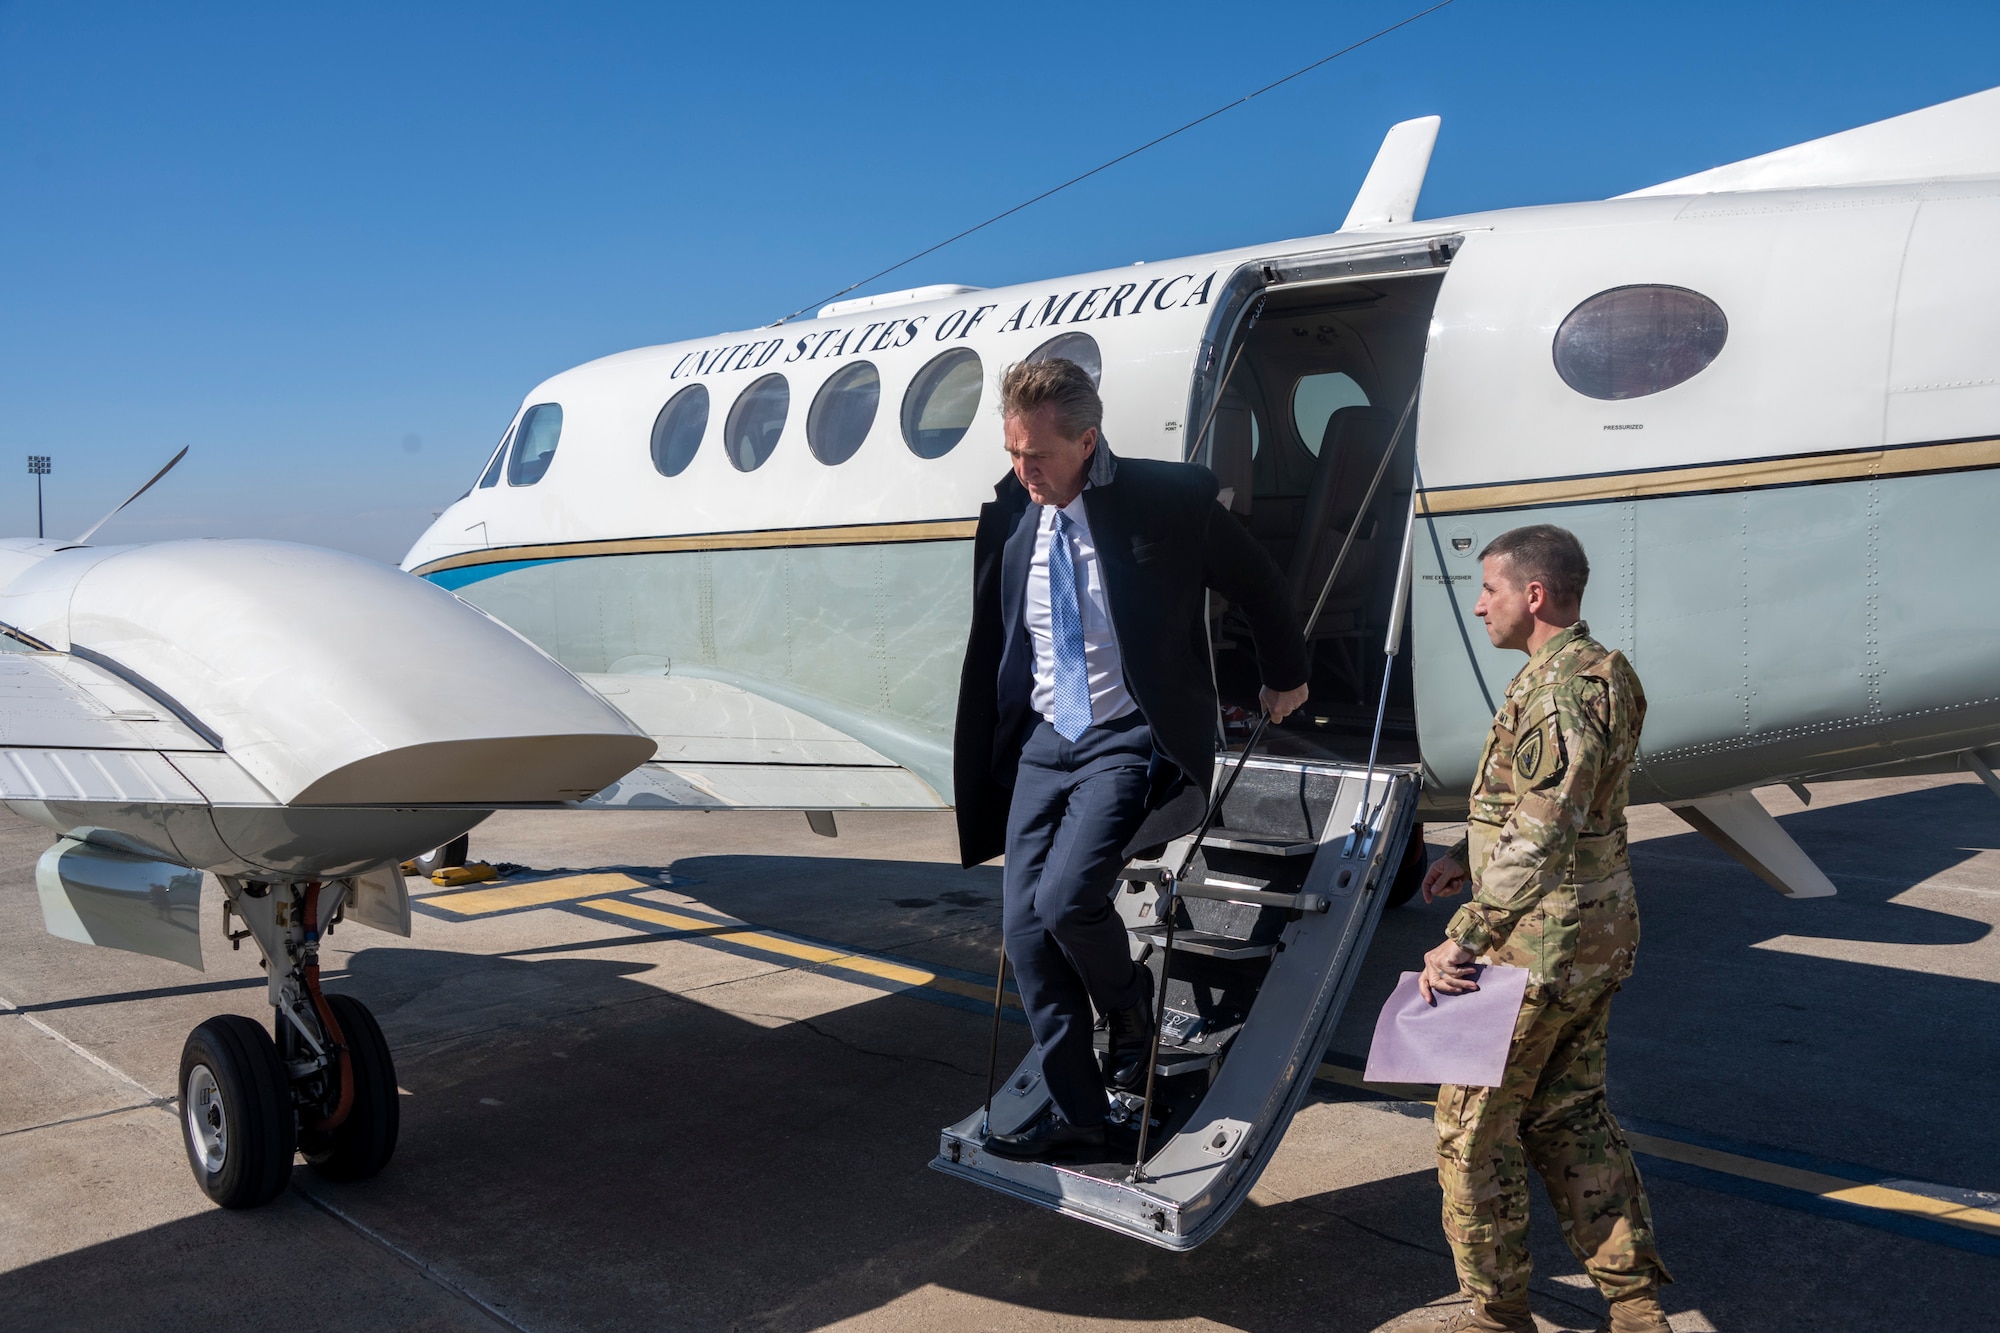 U.S. Ambassador Jeffry Flake, U.S. Ambassador to Türkiye, steps off an aircraft at Incirlik Air Base, Türkiye, Feb 13, 2023. Ambassador Flake visited Incirlik AB to discuss the recent earthquakes that struck central-southern Türkiye on Feb 6, 2023, and see the humanitarian support efforts first-hand. As Ambassador to Türkiye, Flake holds the highest civilian position as The Chief of Mission, and impacts the communication and resources of U.S. personnel, advancing the U.S. foreign policy goals. As a fellow NATO ally, the U.S. Government mobilized personnel to assist Türkiye in their response efforts. (U.S. Air Force photo by Senior Airman David D. McLoney)